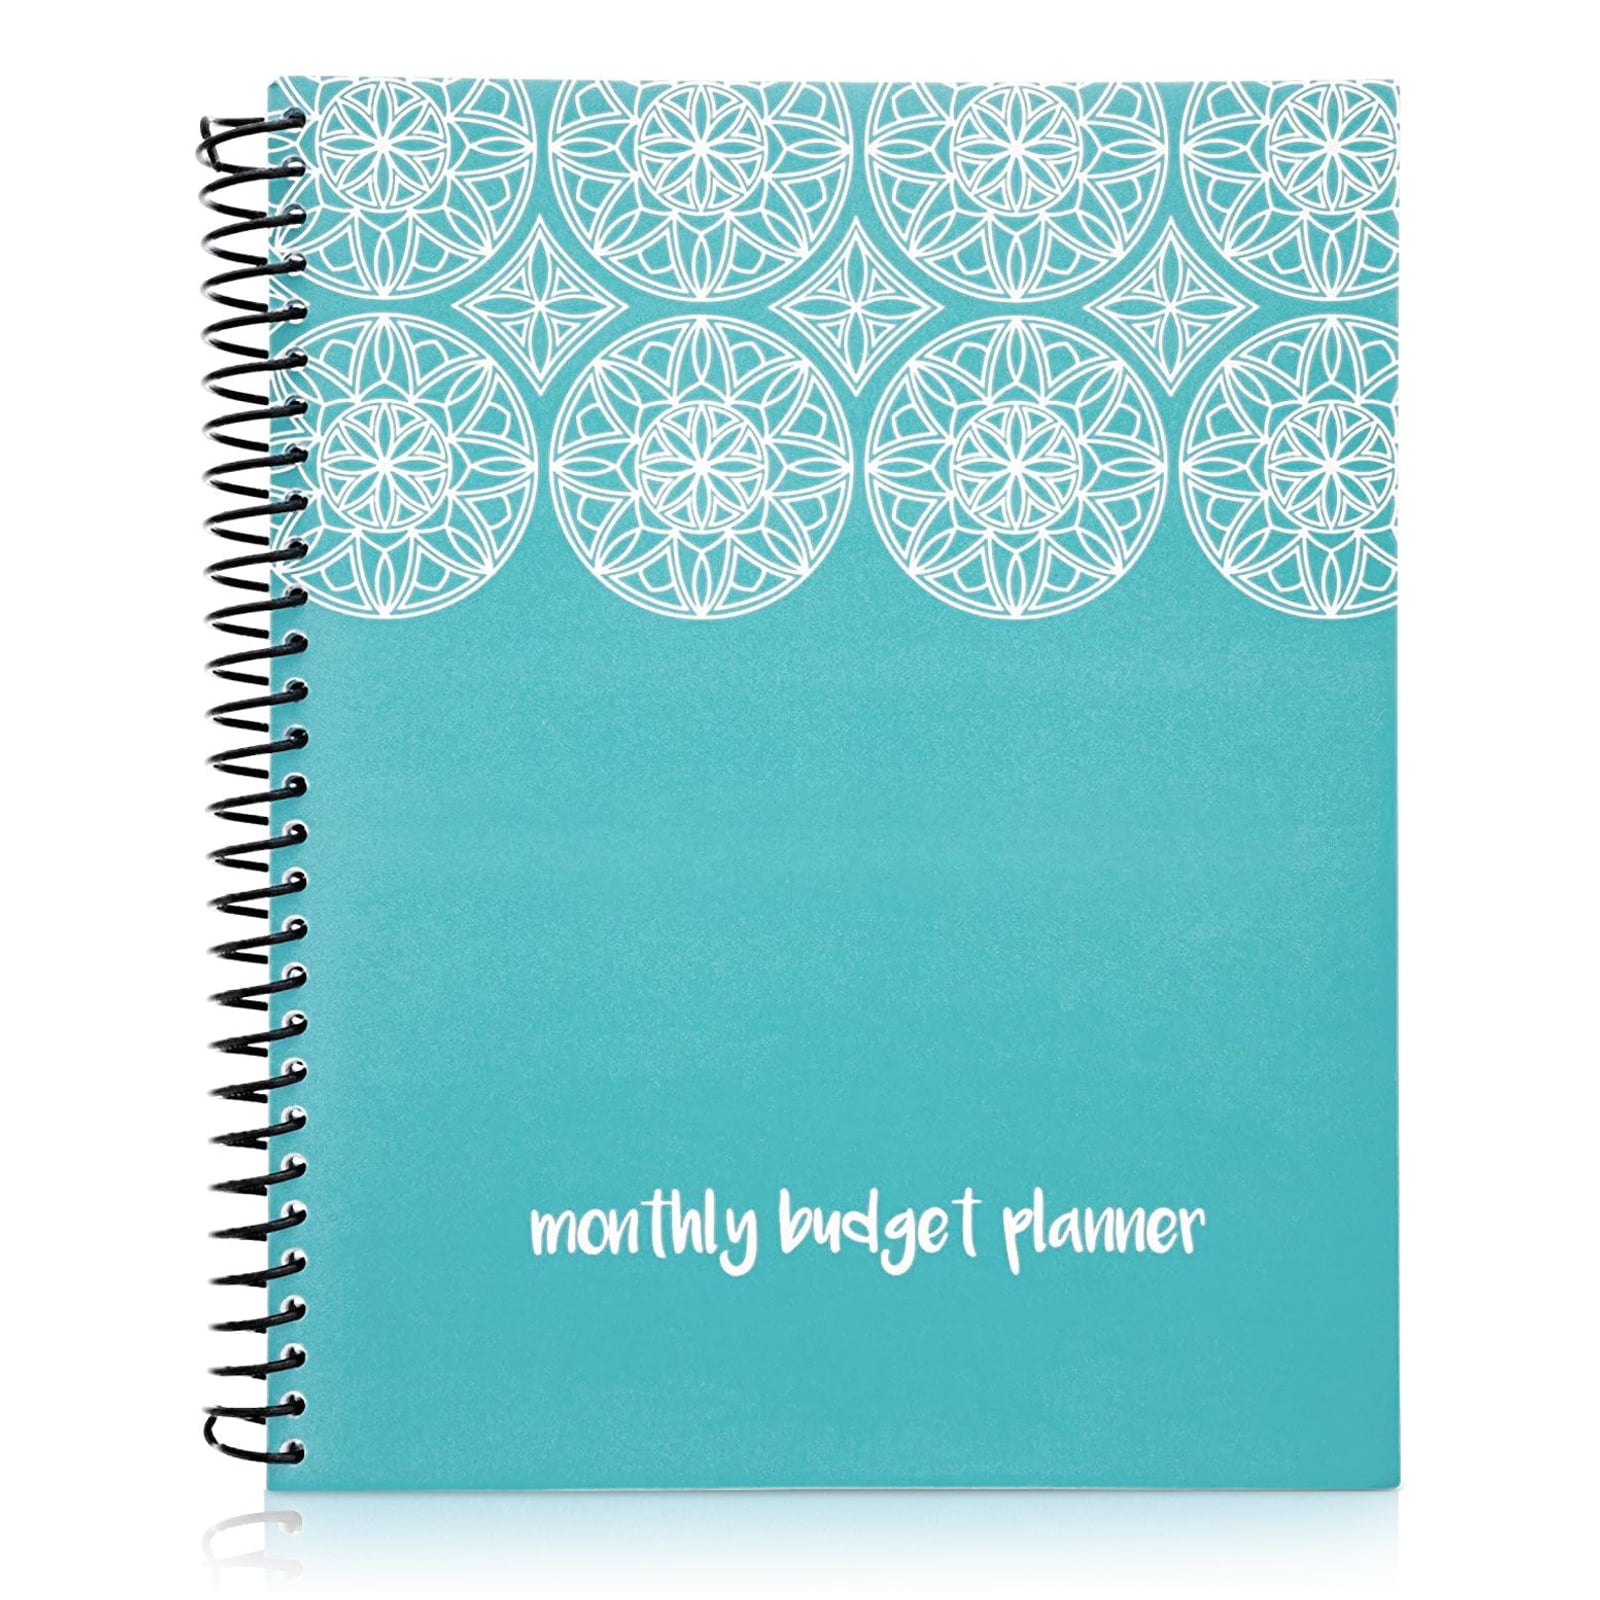 Home Finance & Bill Organizer with Pockets Blue Connected Squares 